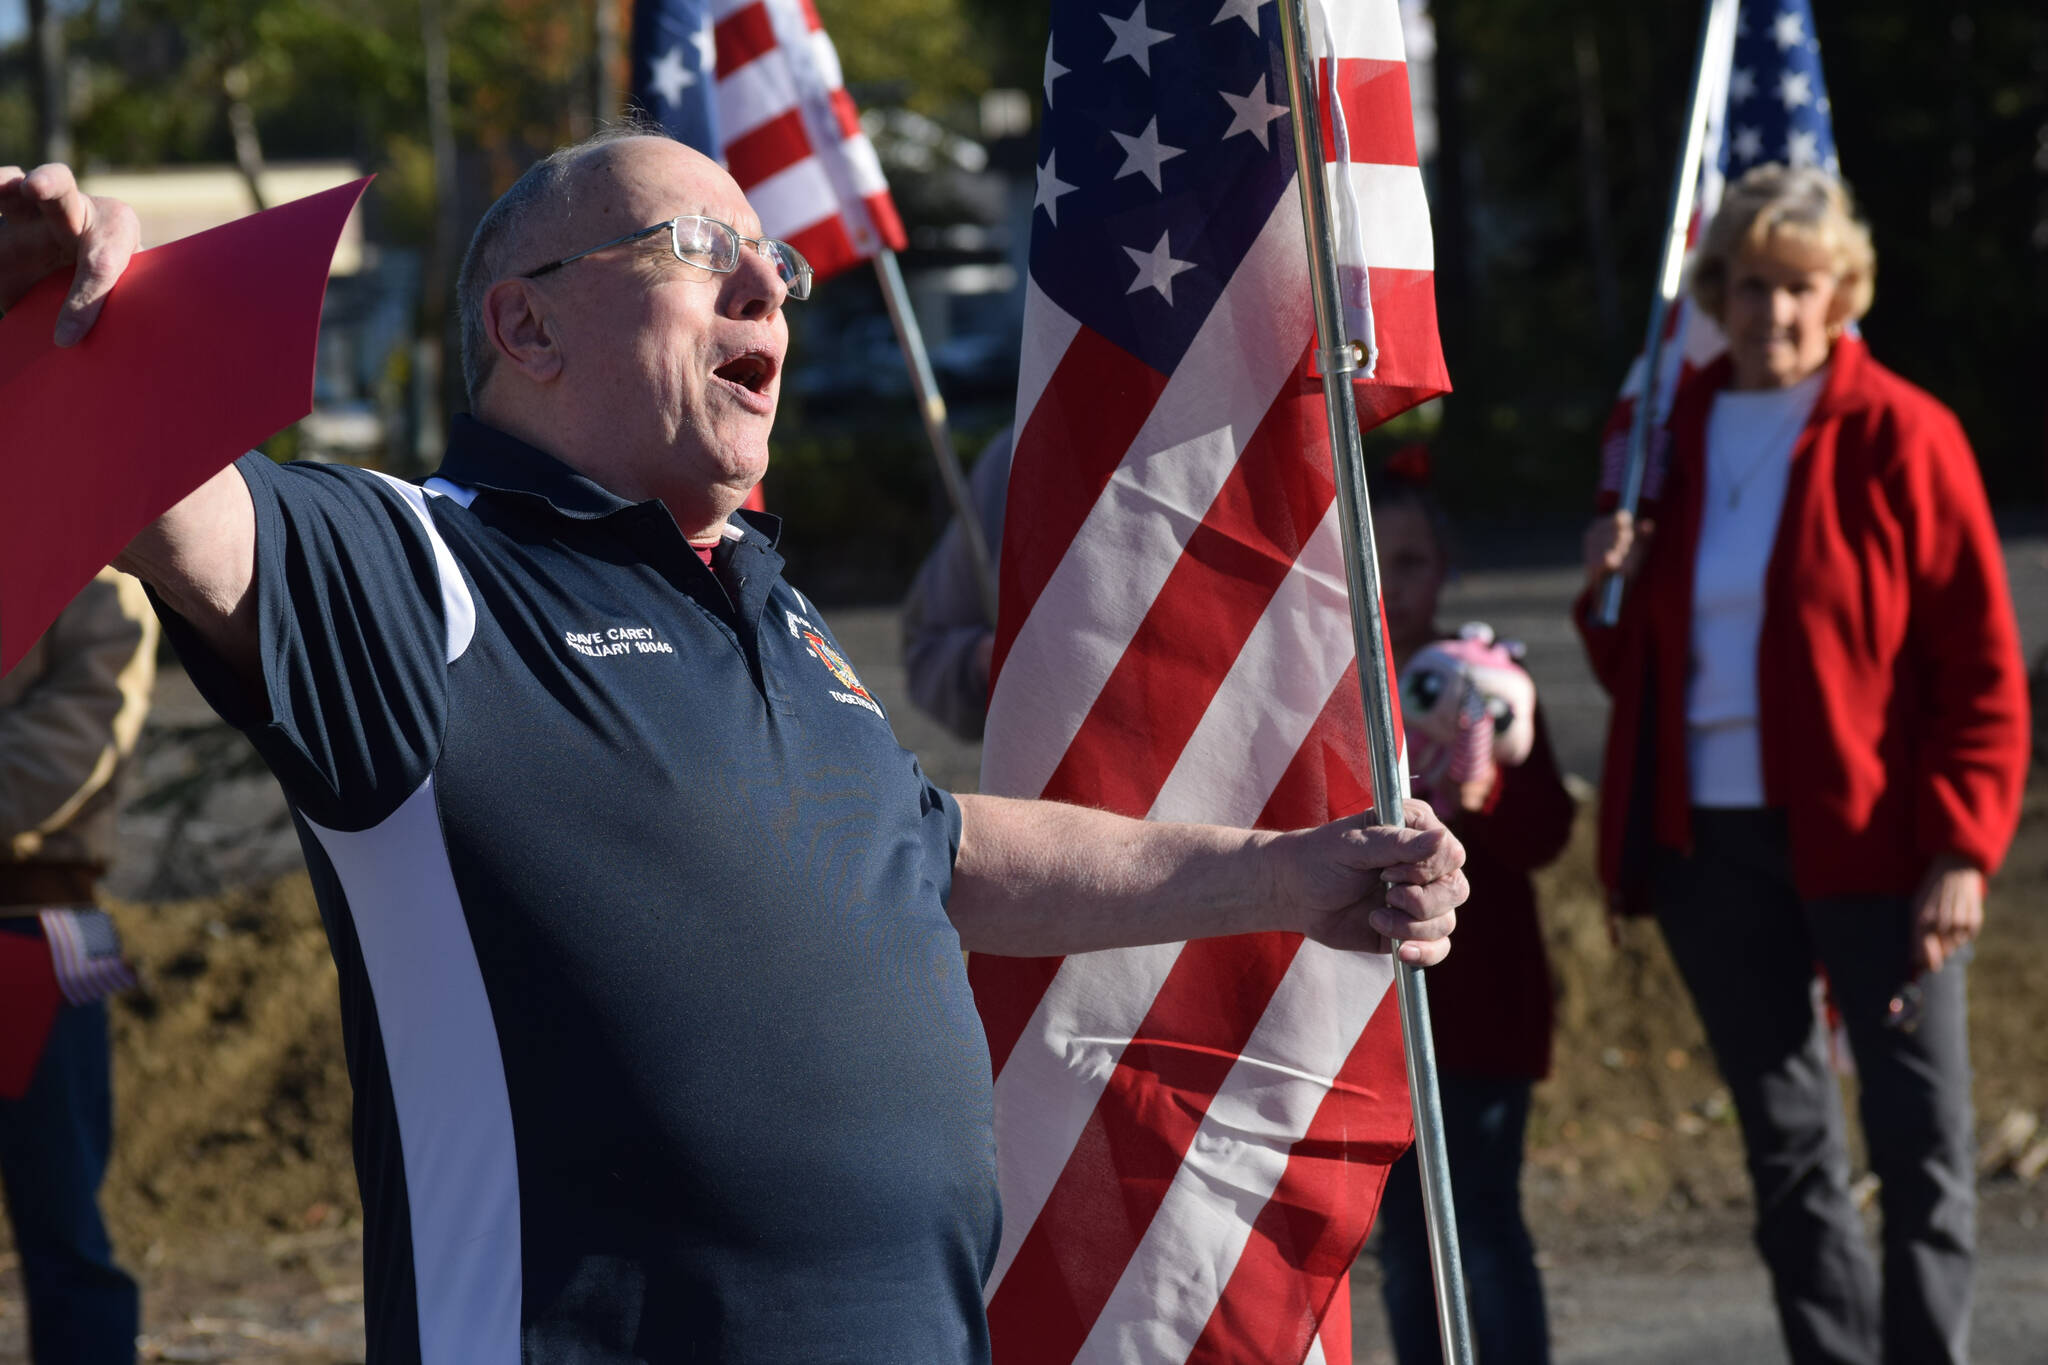 Soldotna City Council member Dave Carey sings “The Battle Hymn of the Republic” at the Veternas of Foreign Wars post in Soldotna on Saturday, Sept. 11, 2021 during the 20th memorial service of the 9/11 terrorist attacks. (Camille Botello/Peninsula Clarion)